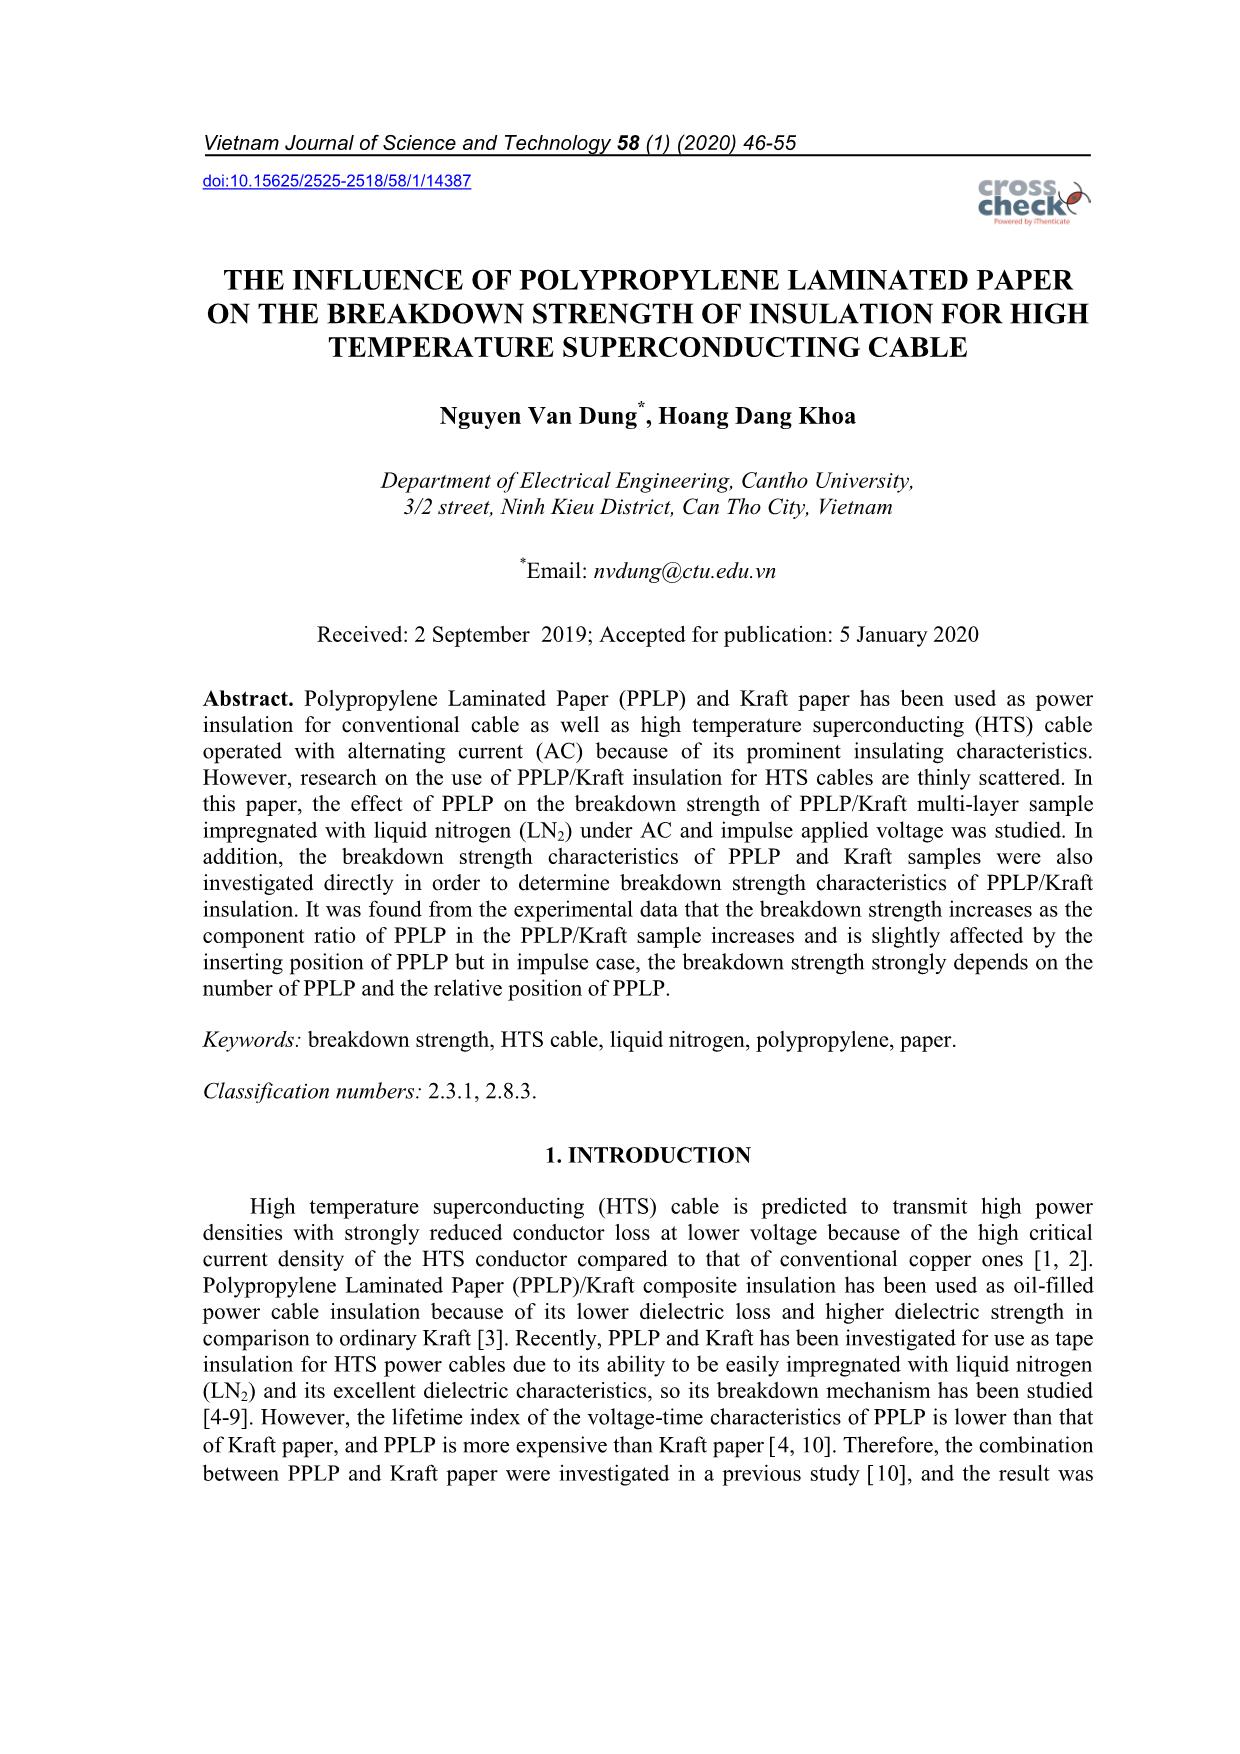 The influence of polypropylene laminated paper on the breakdown strength of insulation for high temperature superconducting cable trang 1